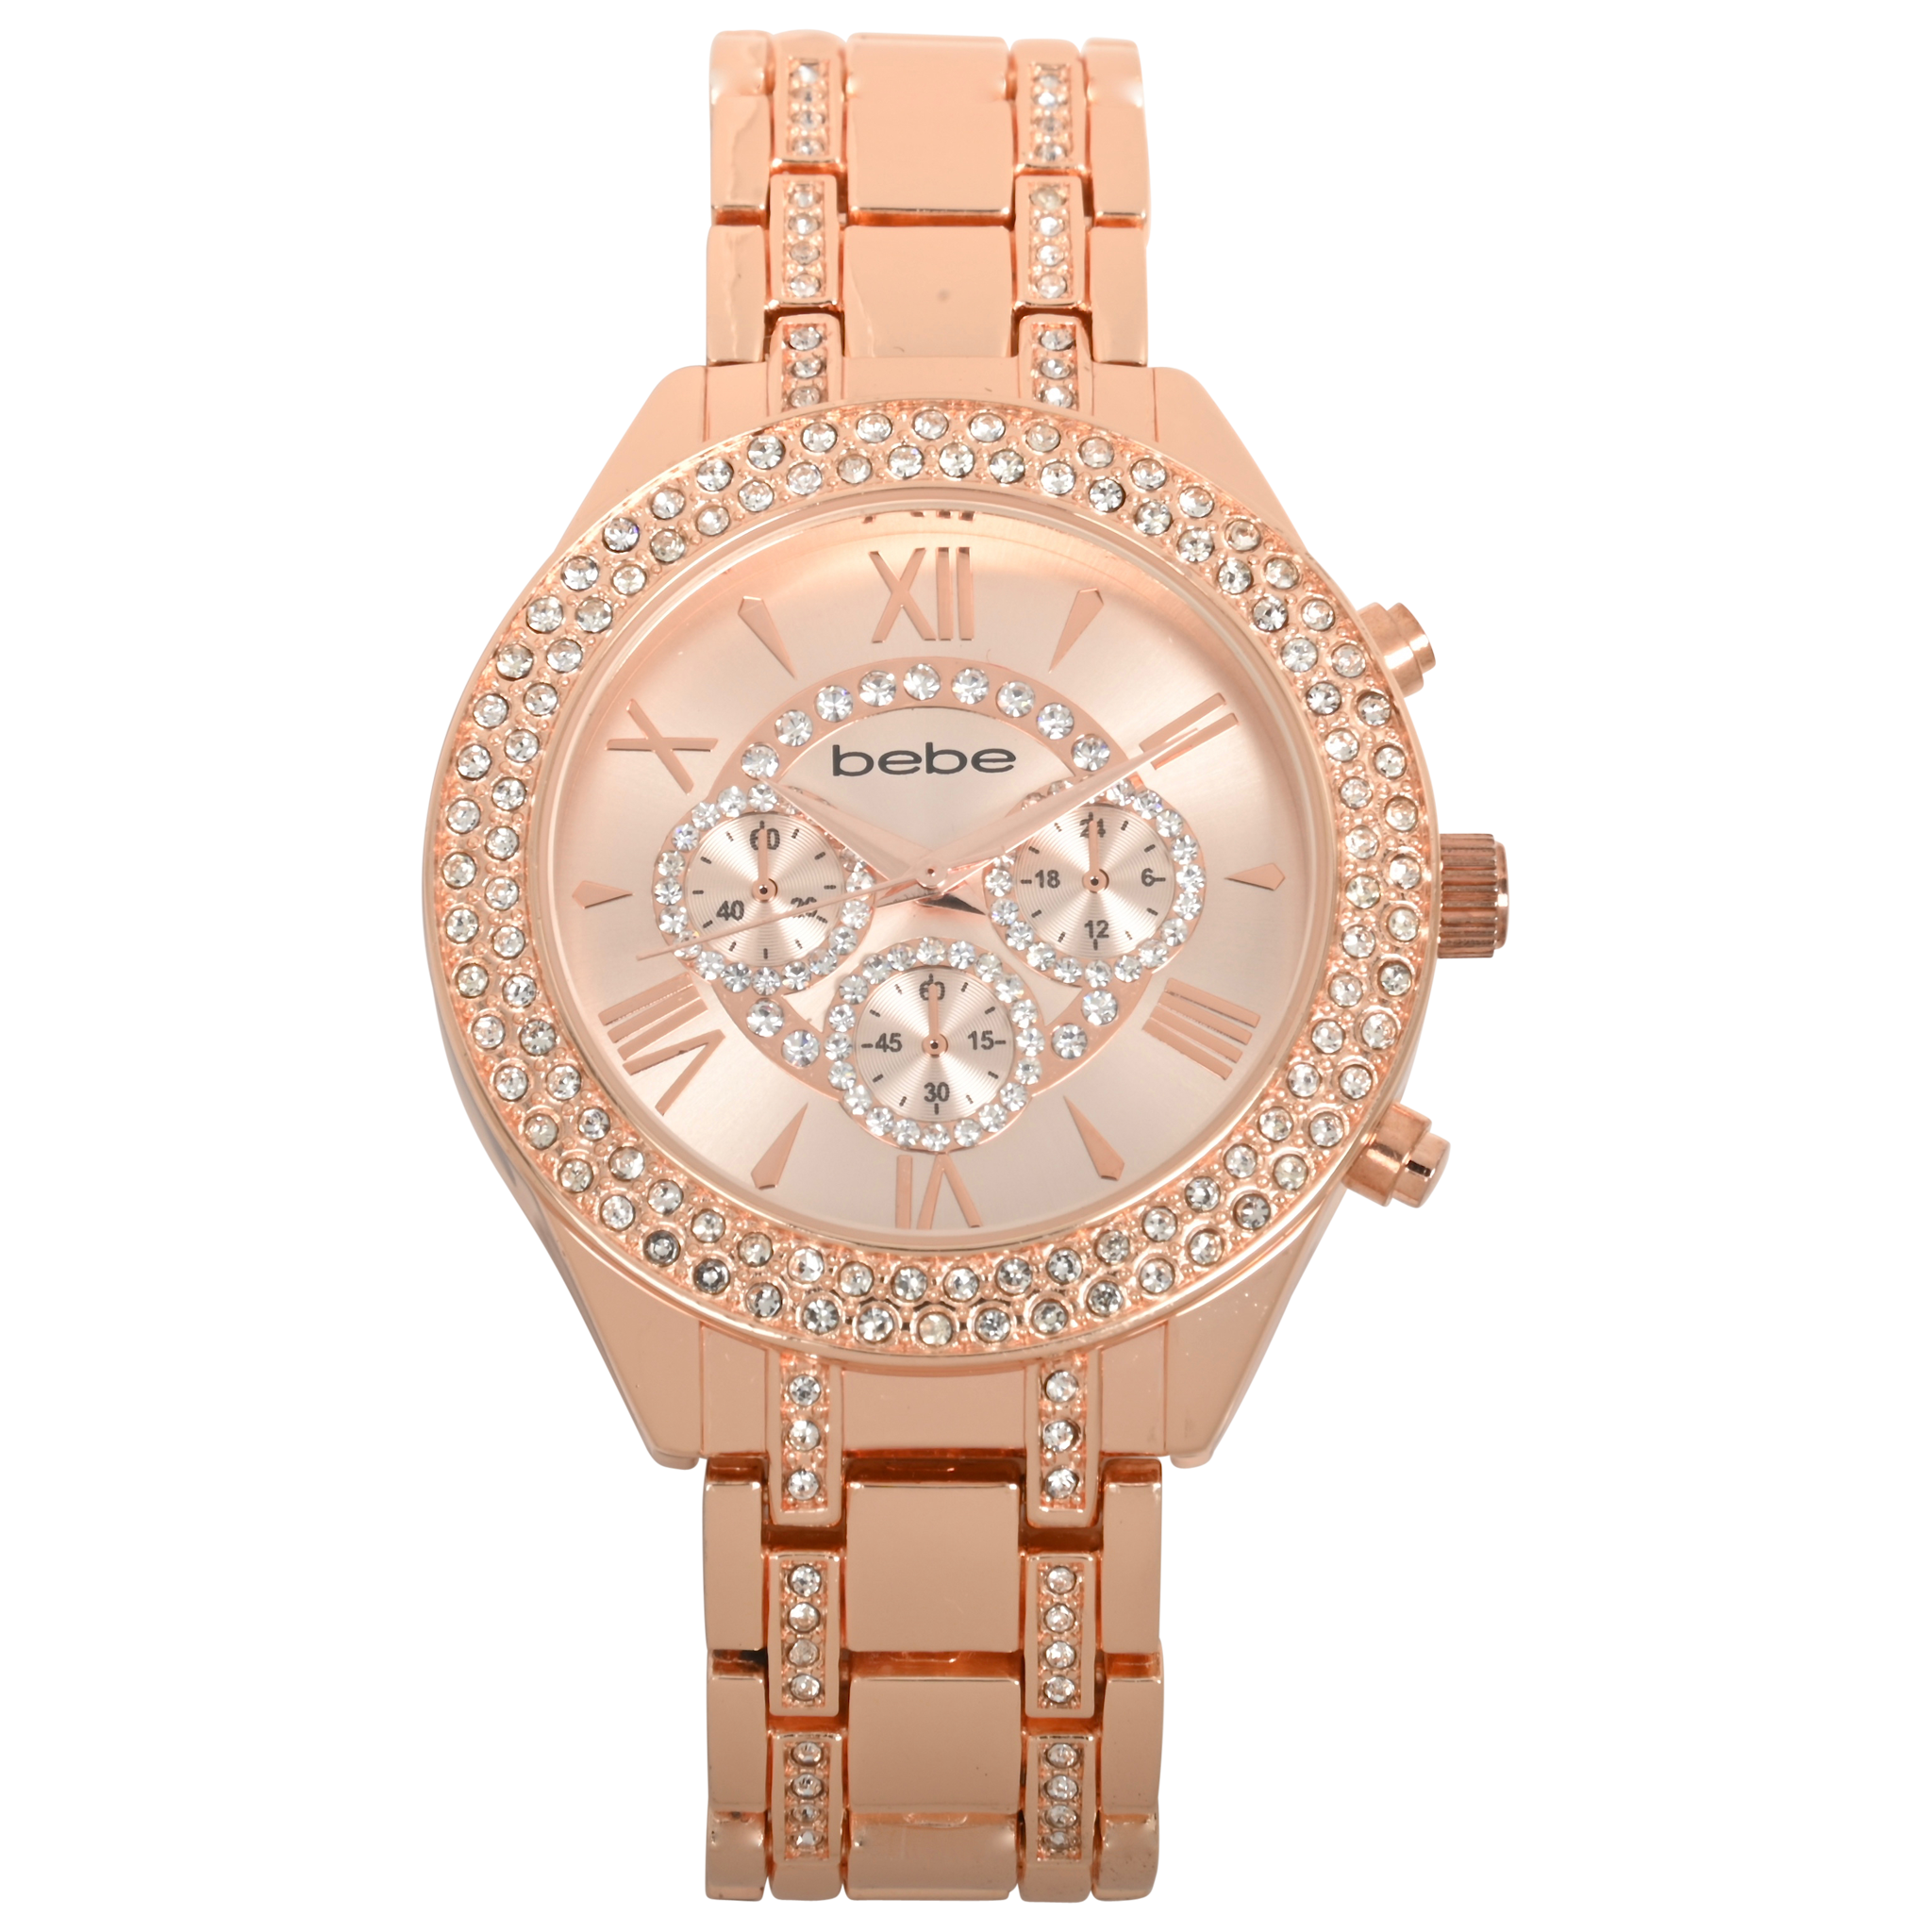 Bebe Rose Gold Watch With Double Crystal Band Rows Beb5154 Tic Toc Trends